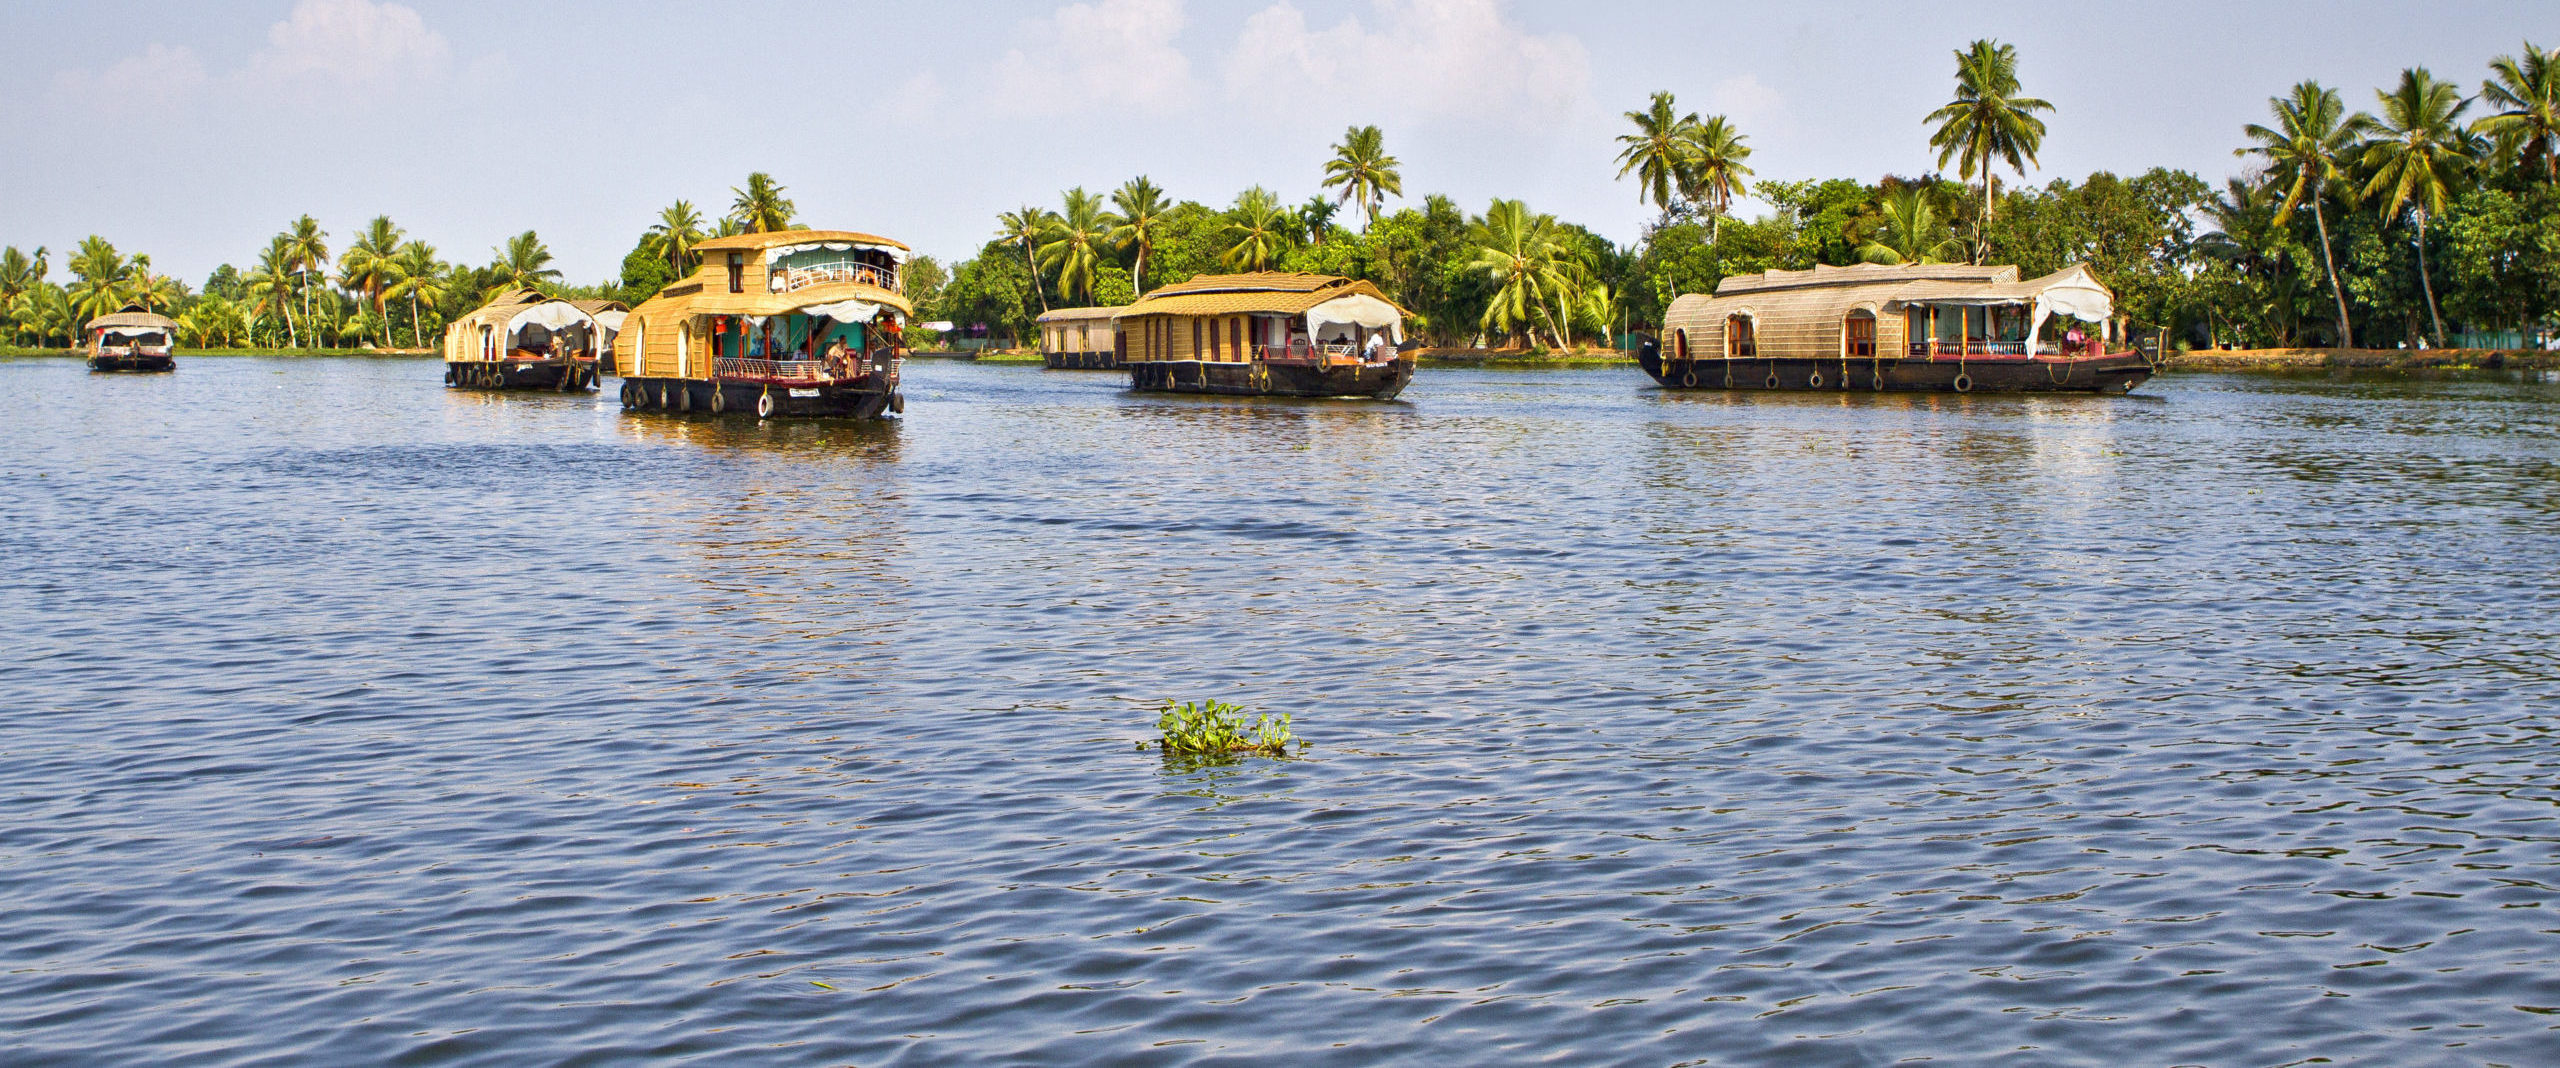 Discover remarkable Indian landscape like these Keralan backwaters when you take a tailor-made holiday with Alfred&.